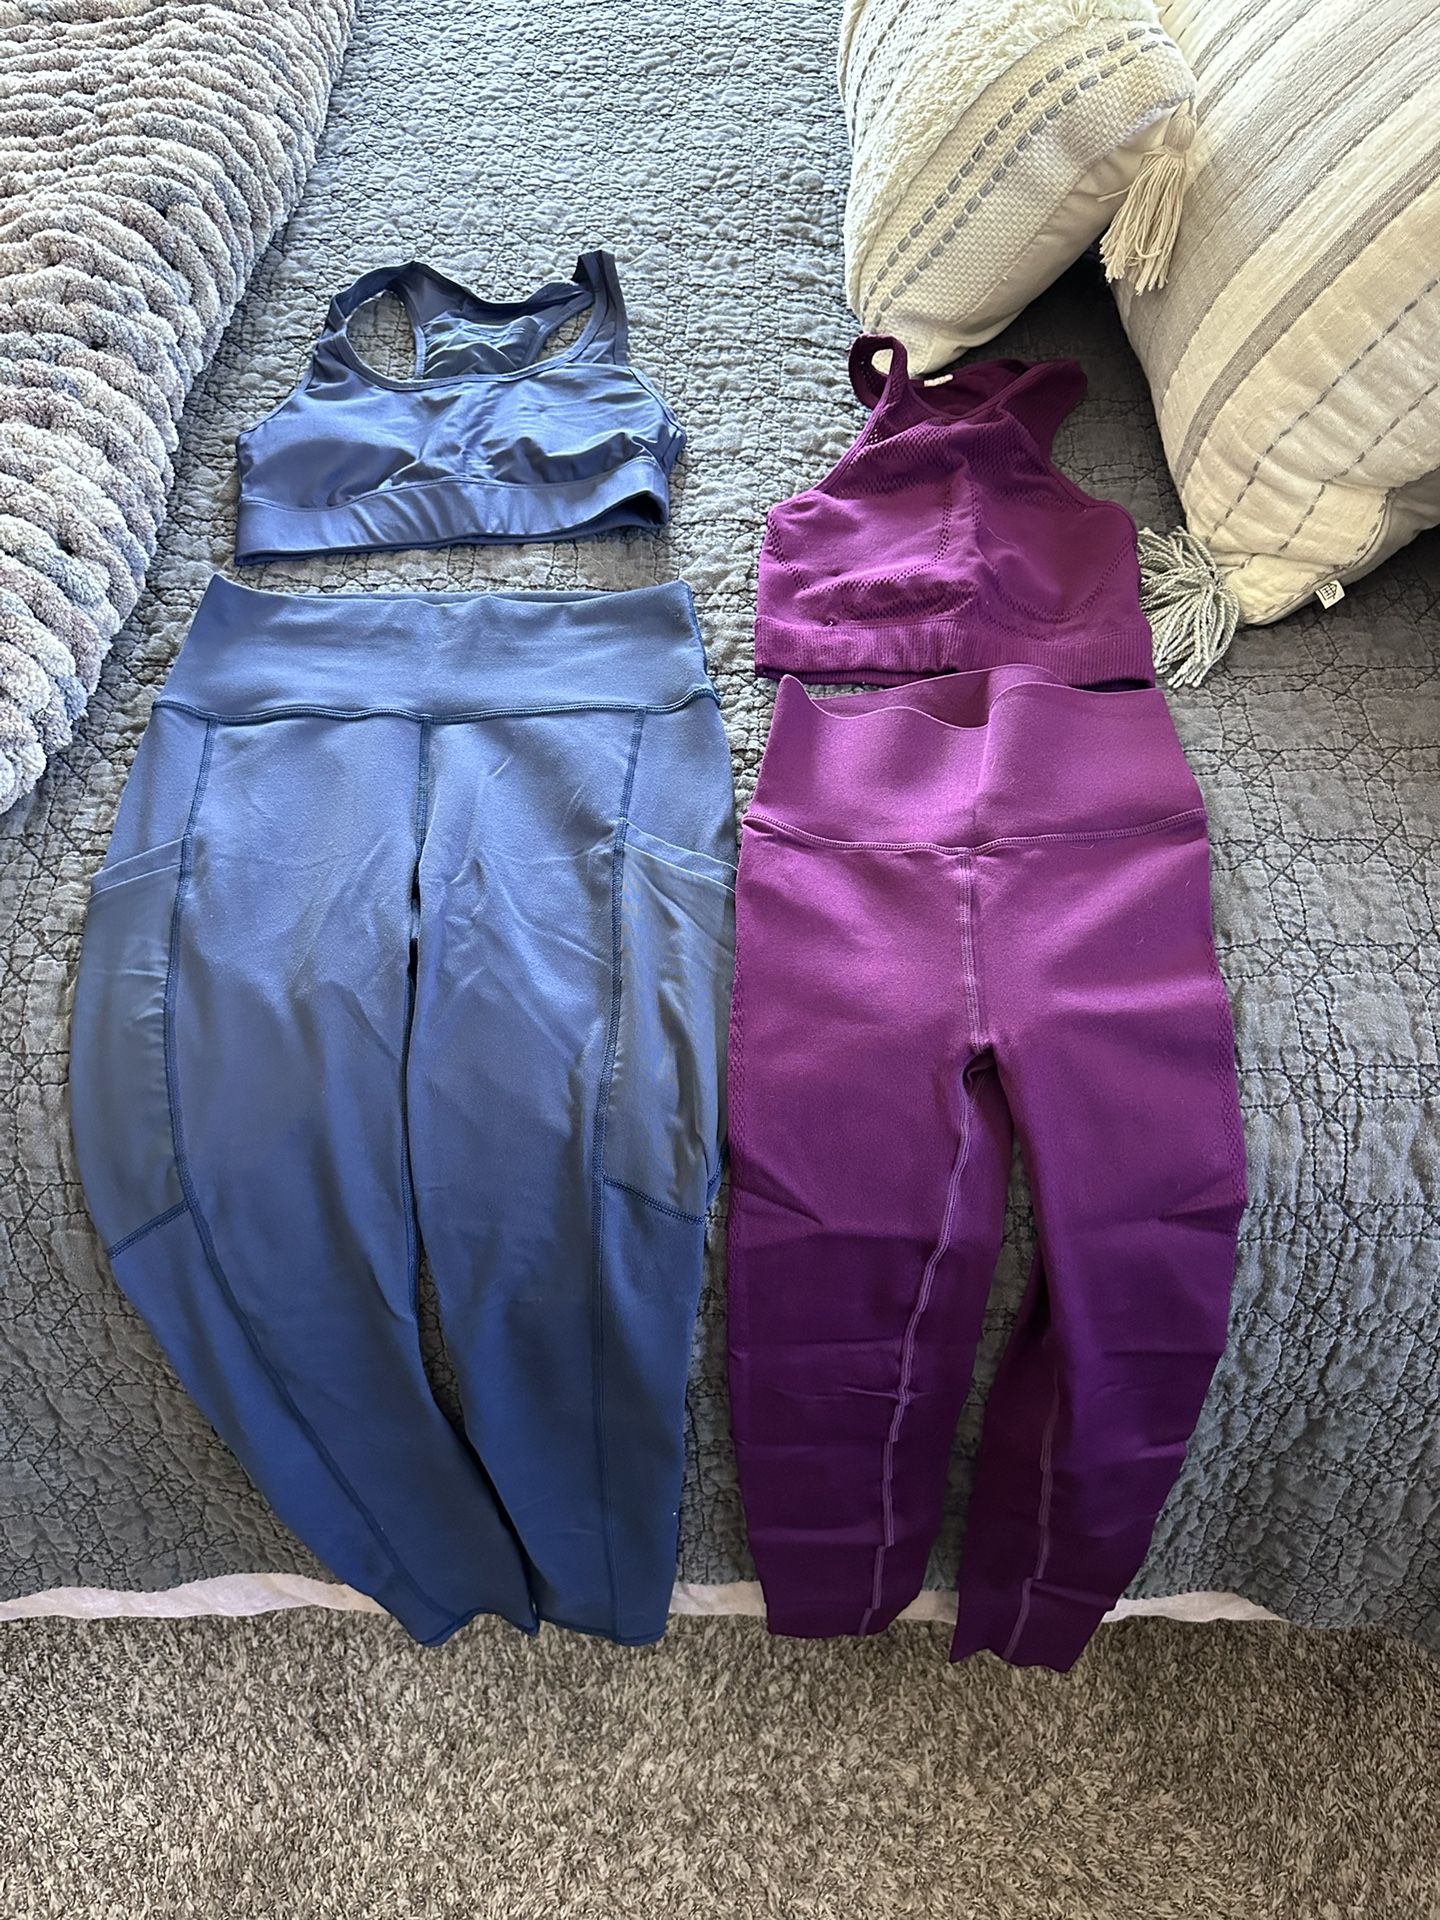 Fabletics And Other Work Out Clothing